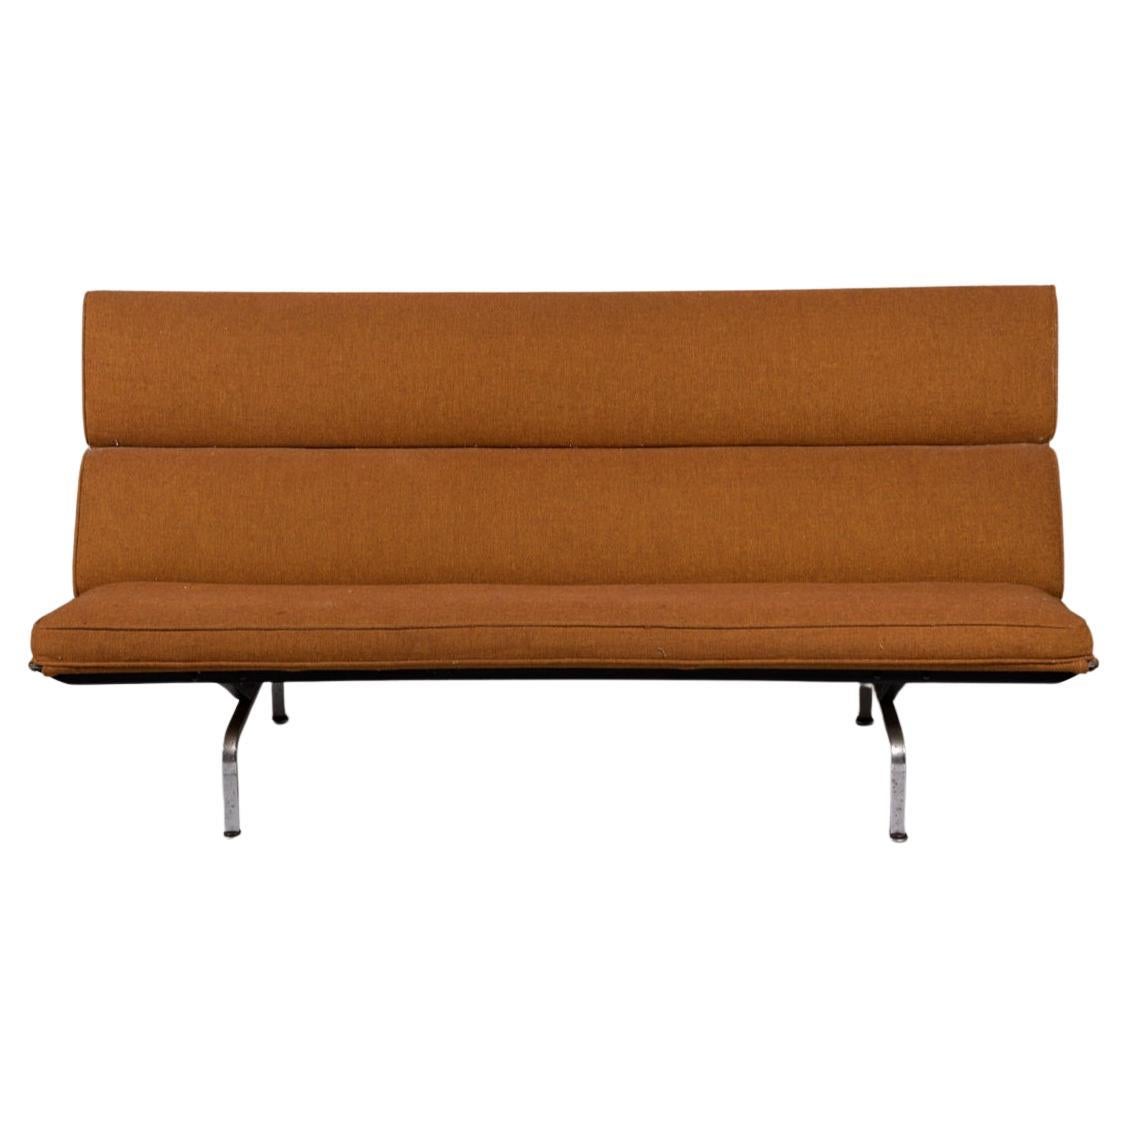 Original Mid century Compact Sofa by Ray and Charles Eames for Herman Miller For Sale